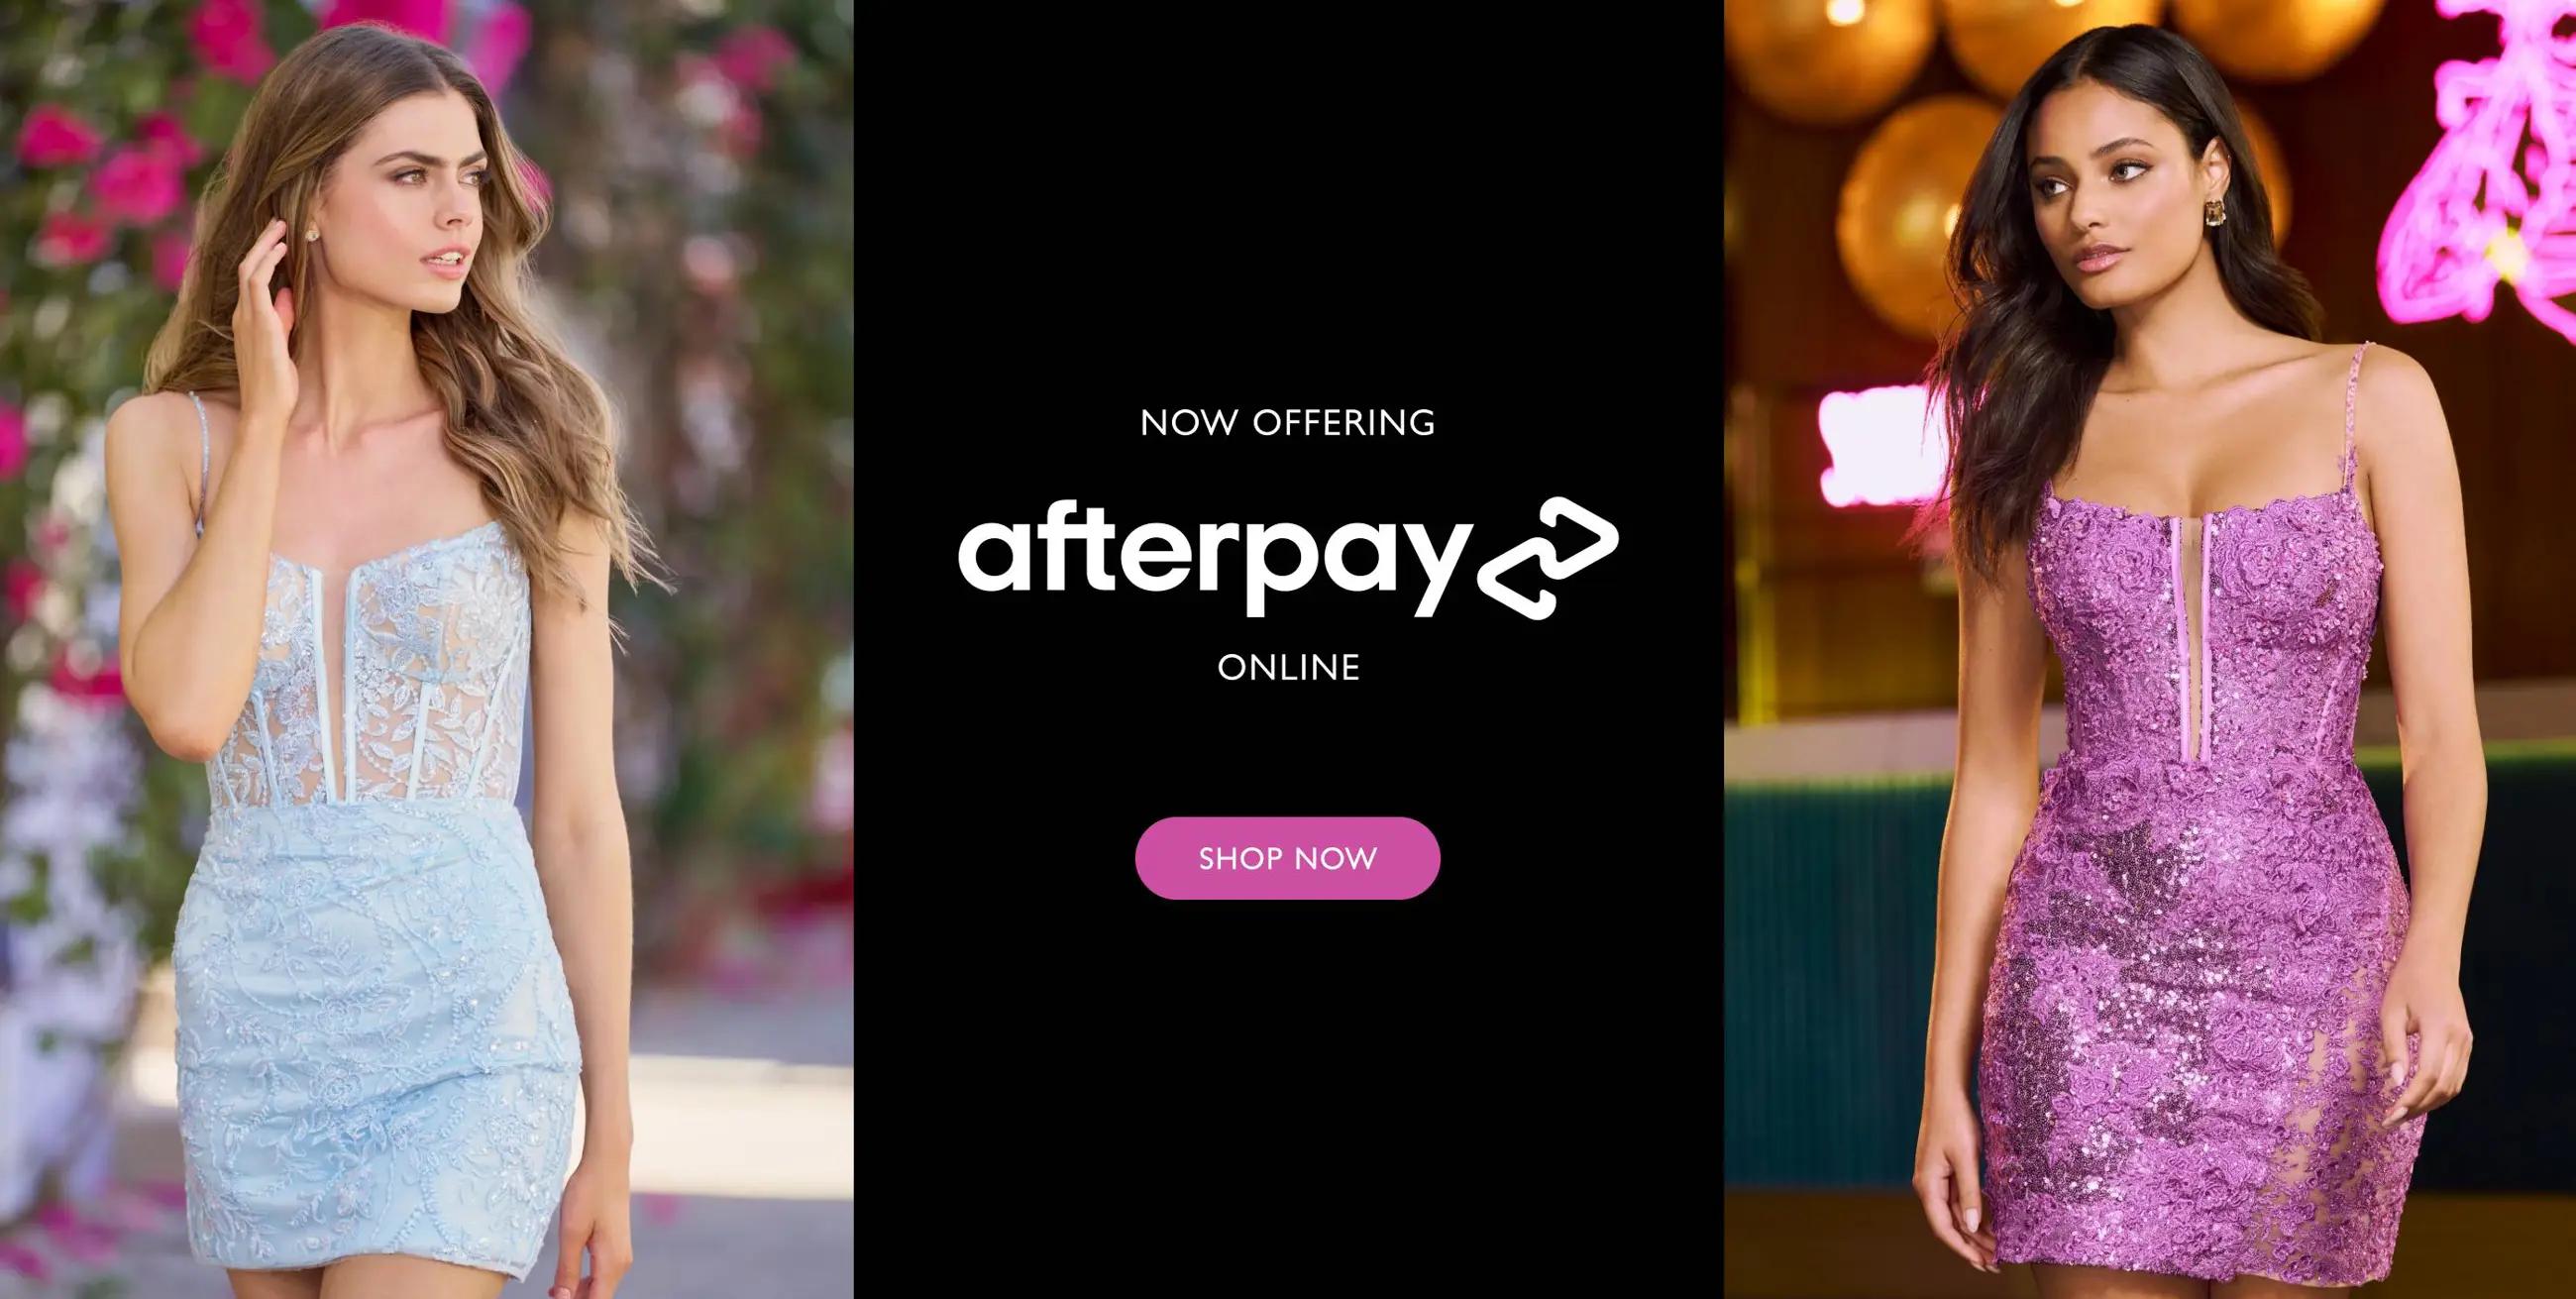 Banner promoting Afterpay online and in-store